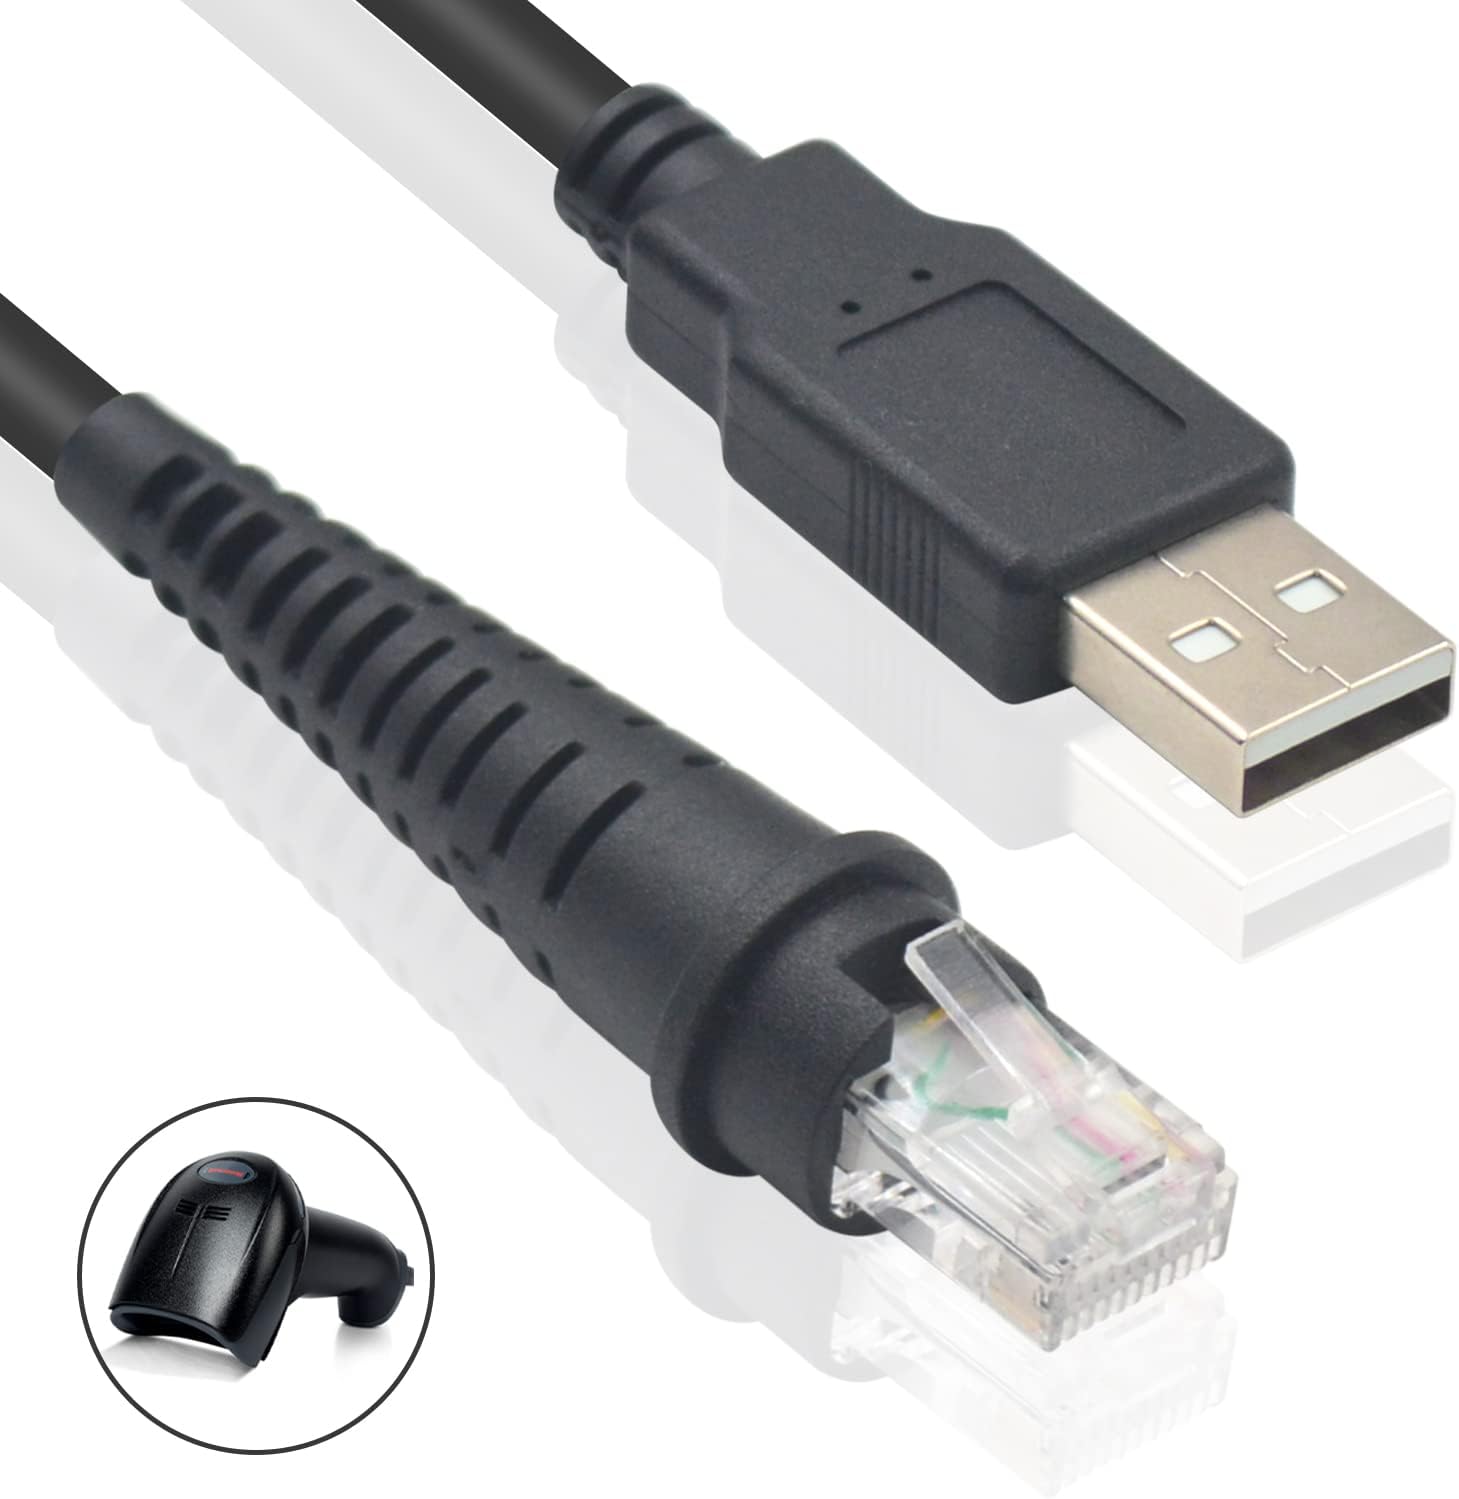 USB 2.0 to RJ45 Cable Compatible for Honey-Well Barcode Scanner 1900 Series